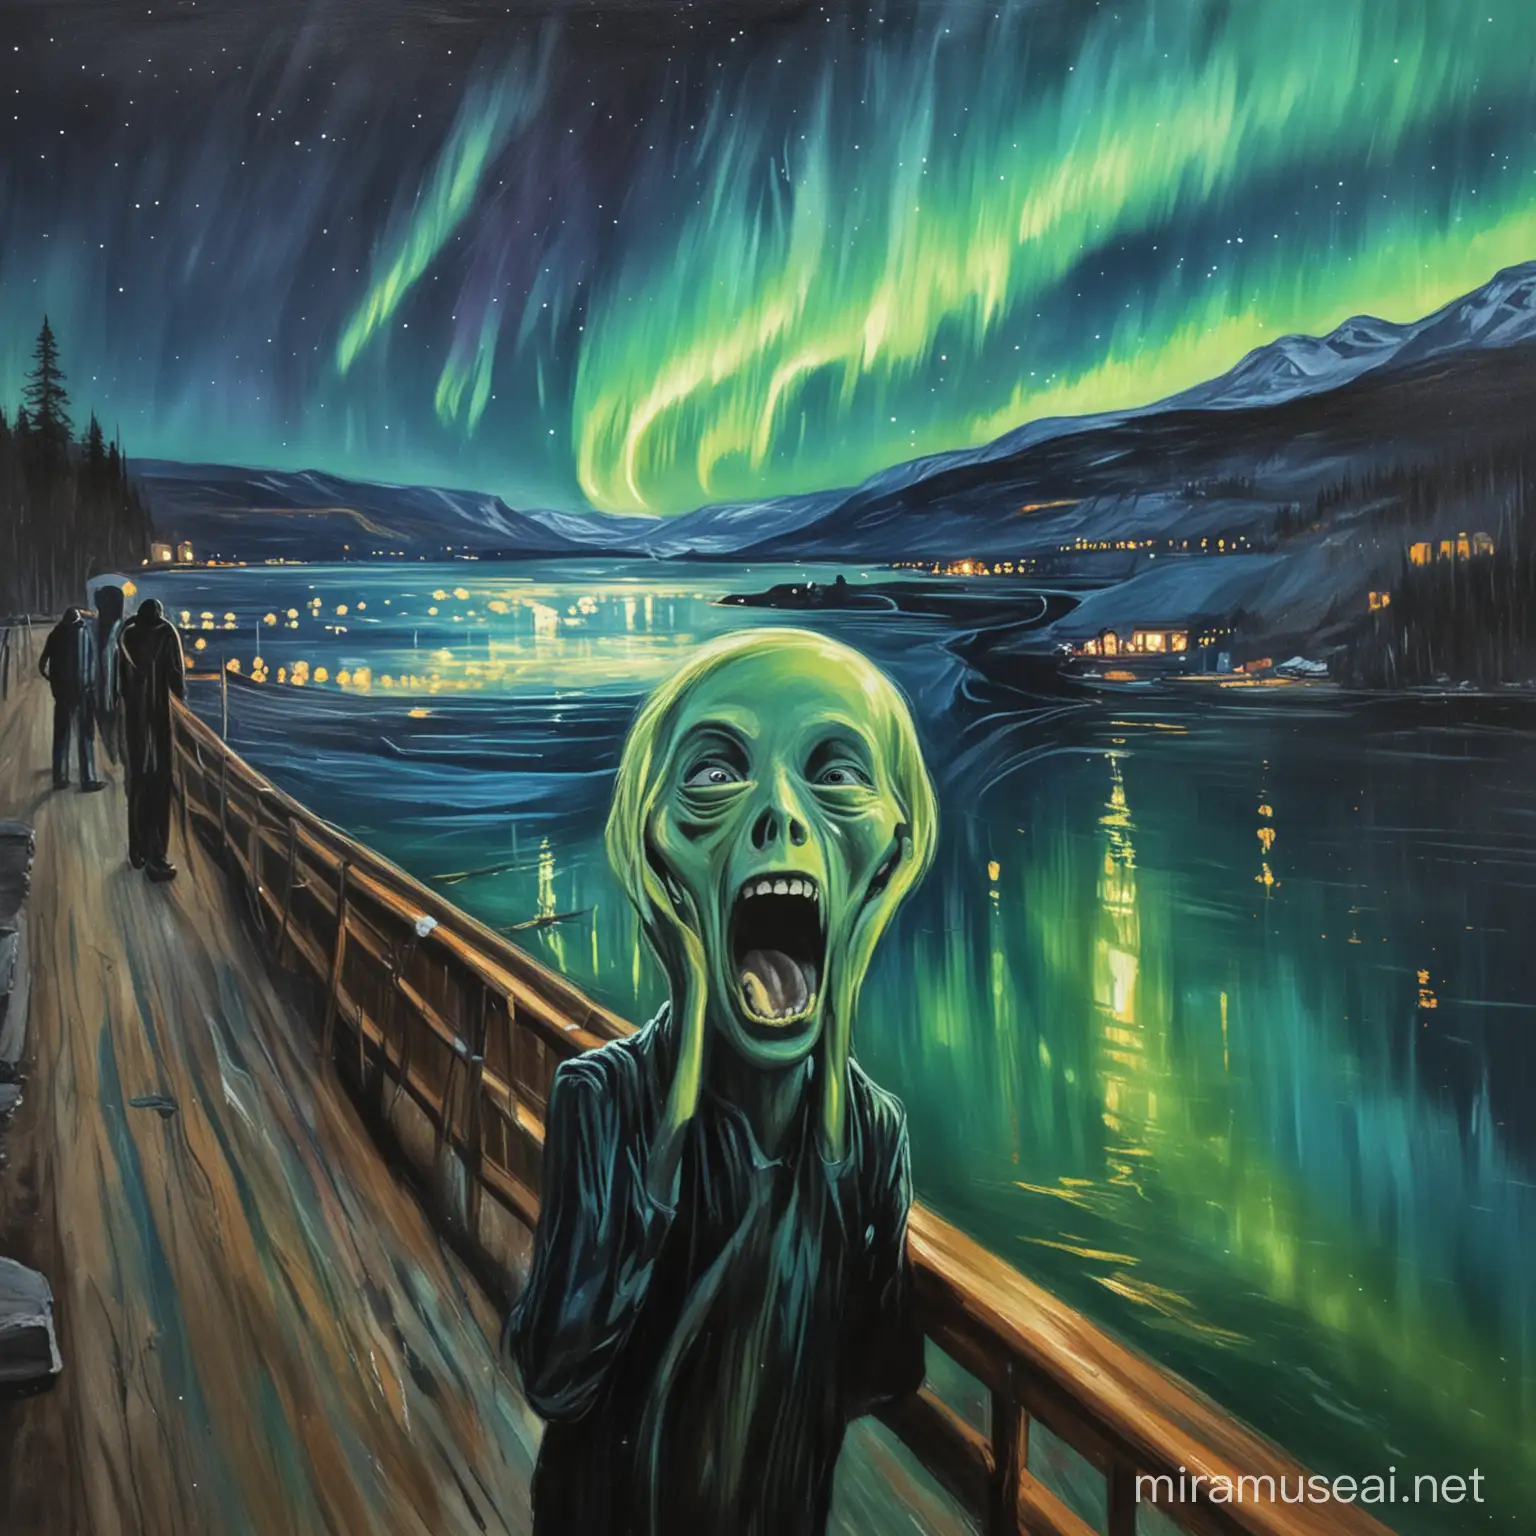 the scream painting with the northern lights in the background and the face smiling